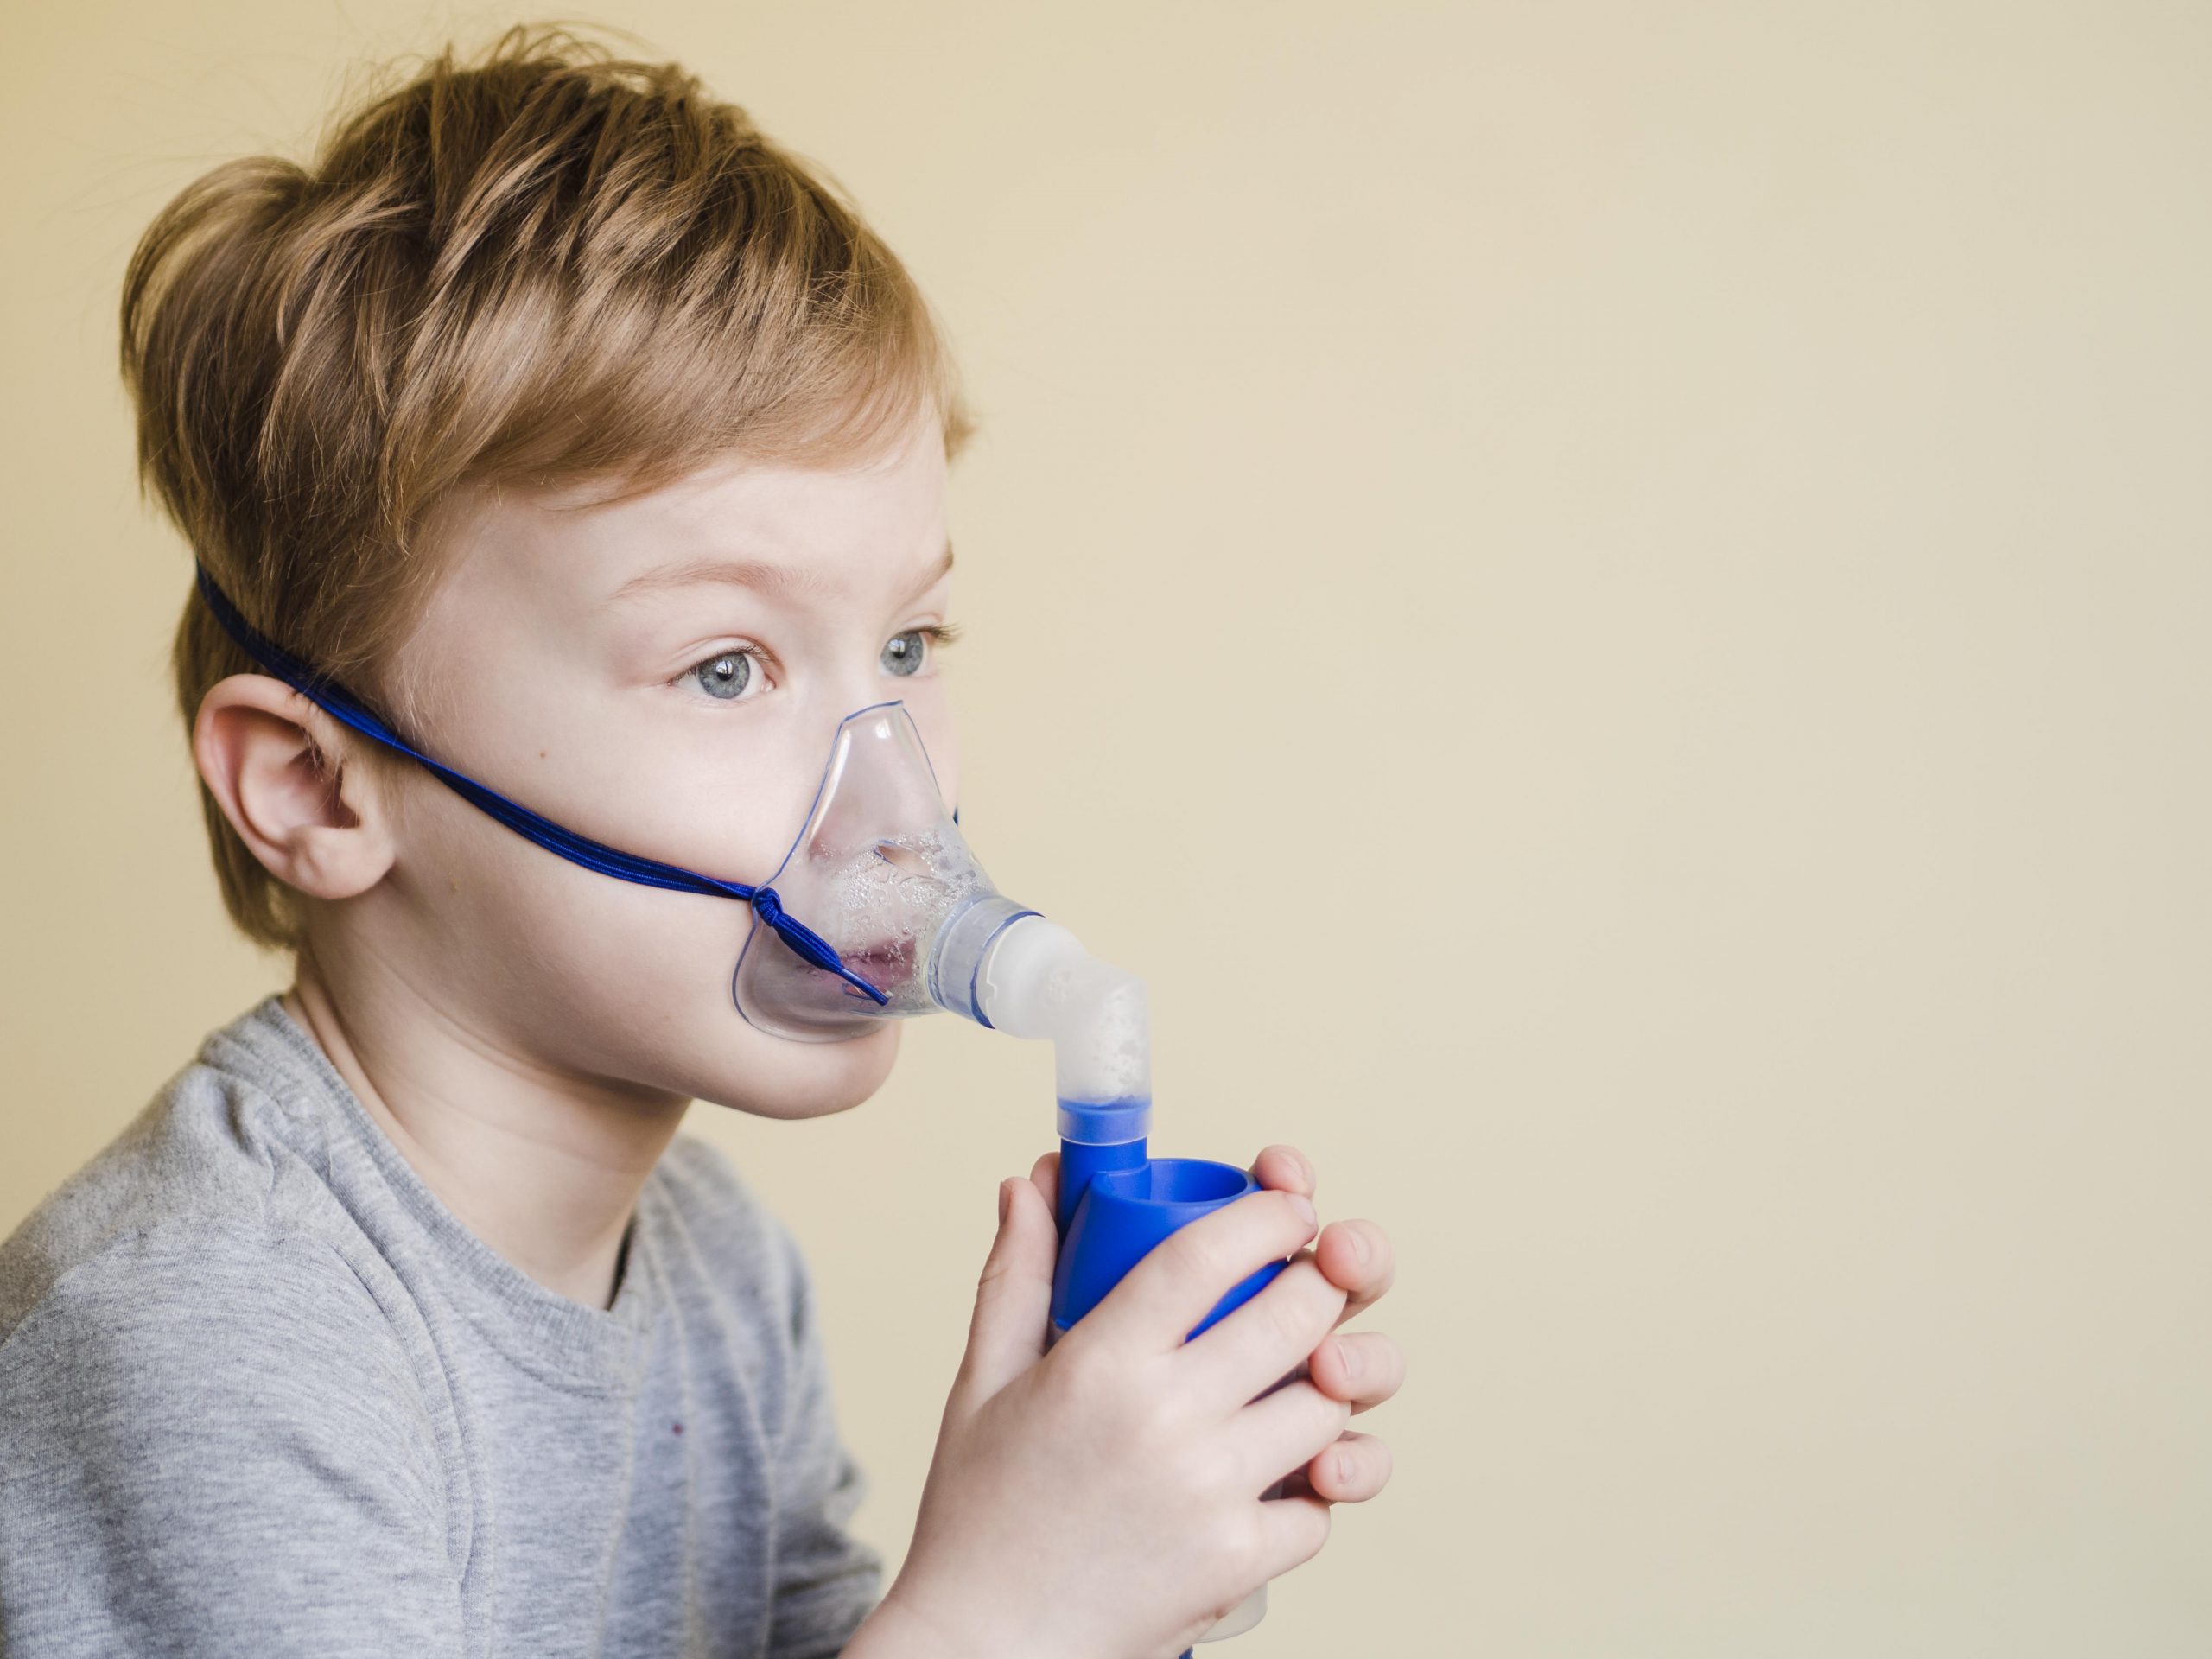 Number of asthma diagnoses declined during pandemic